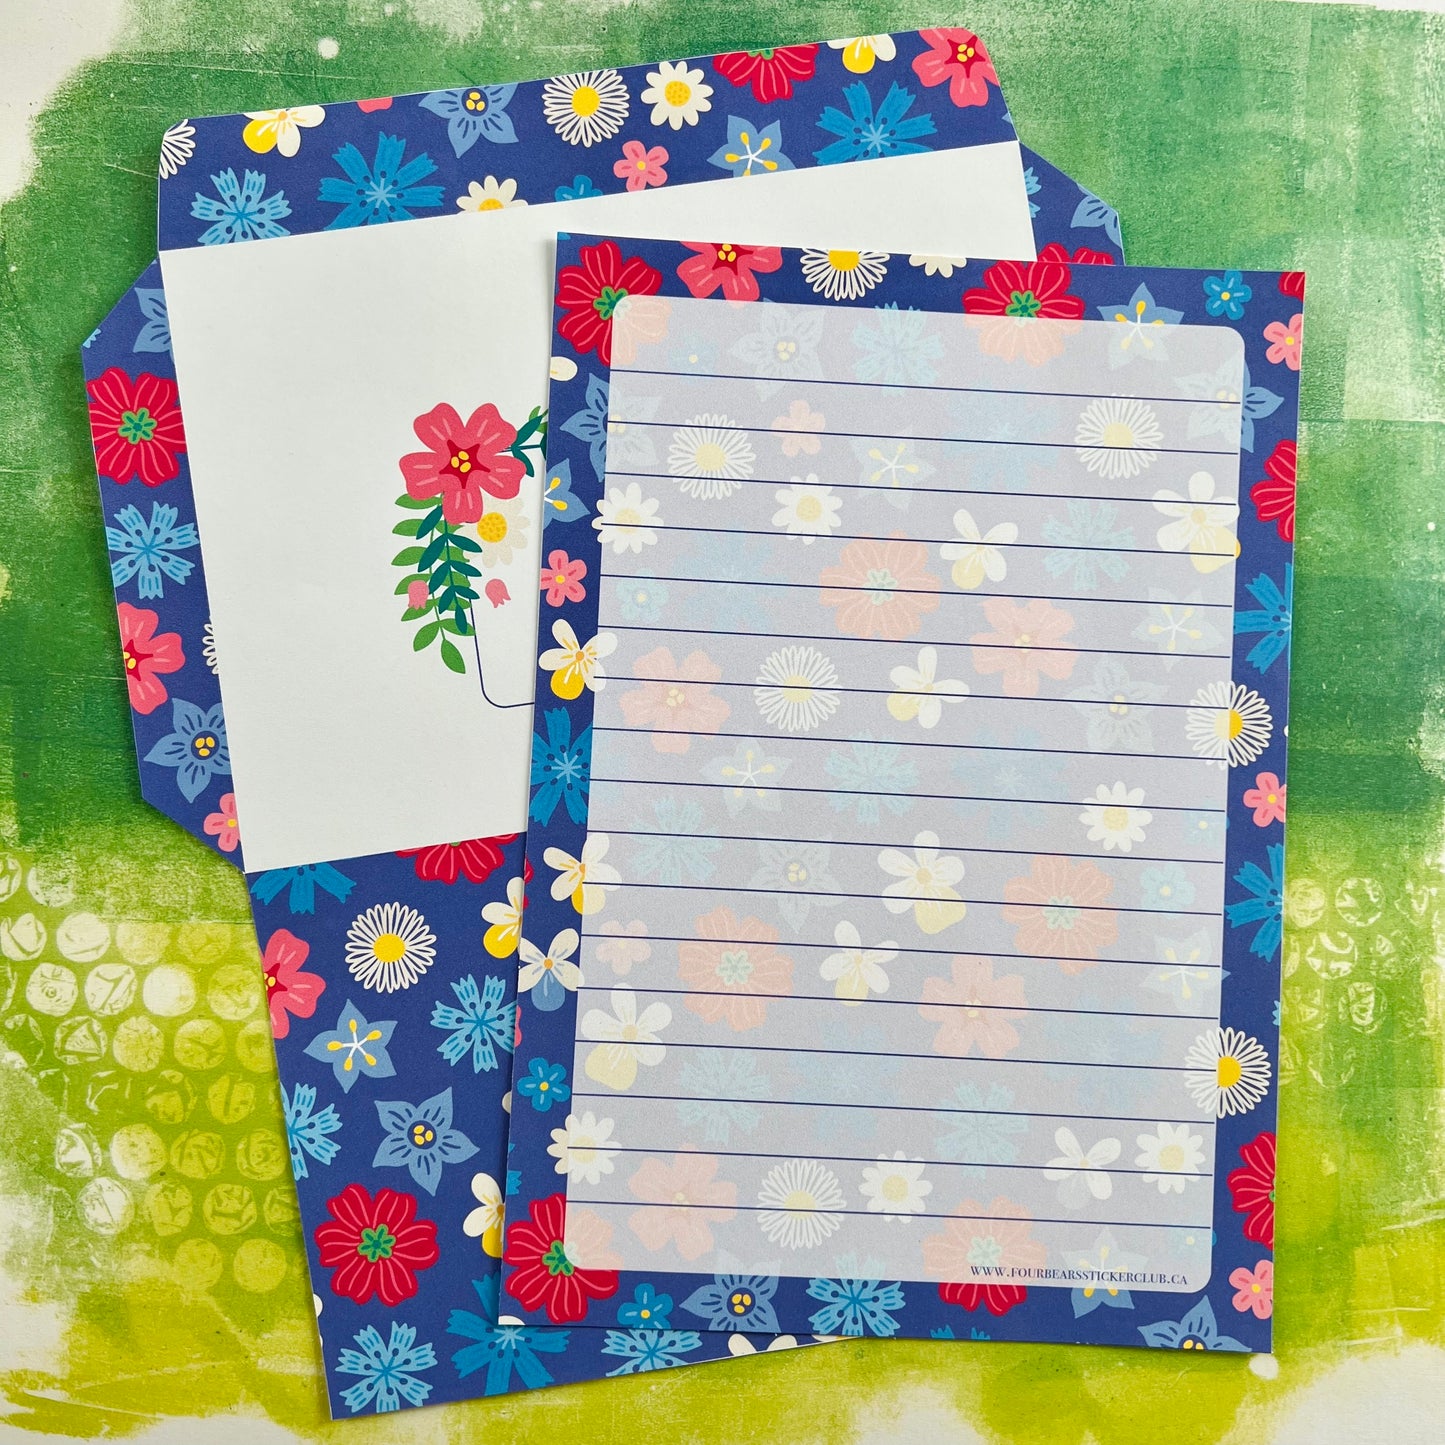 Floral Meadow Stationery